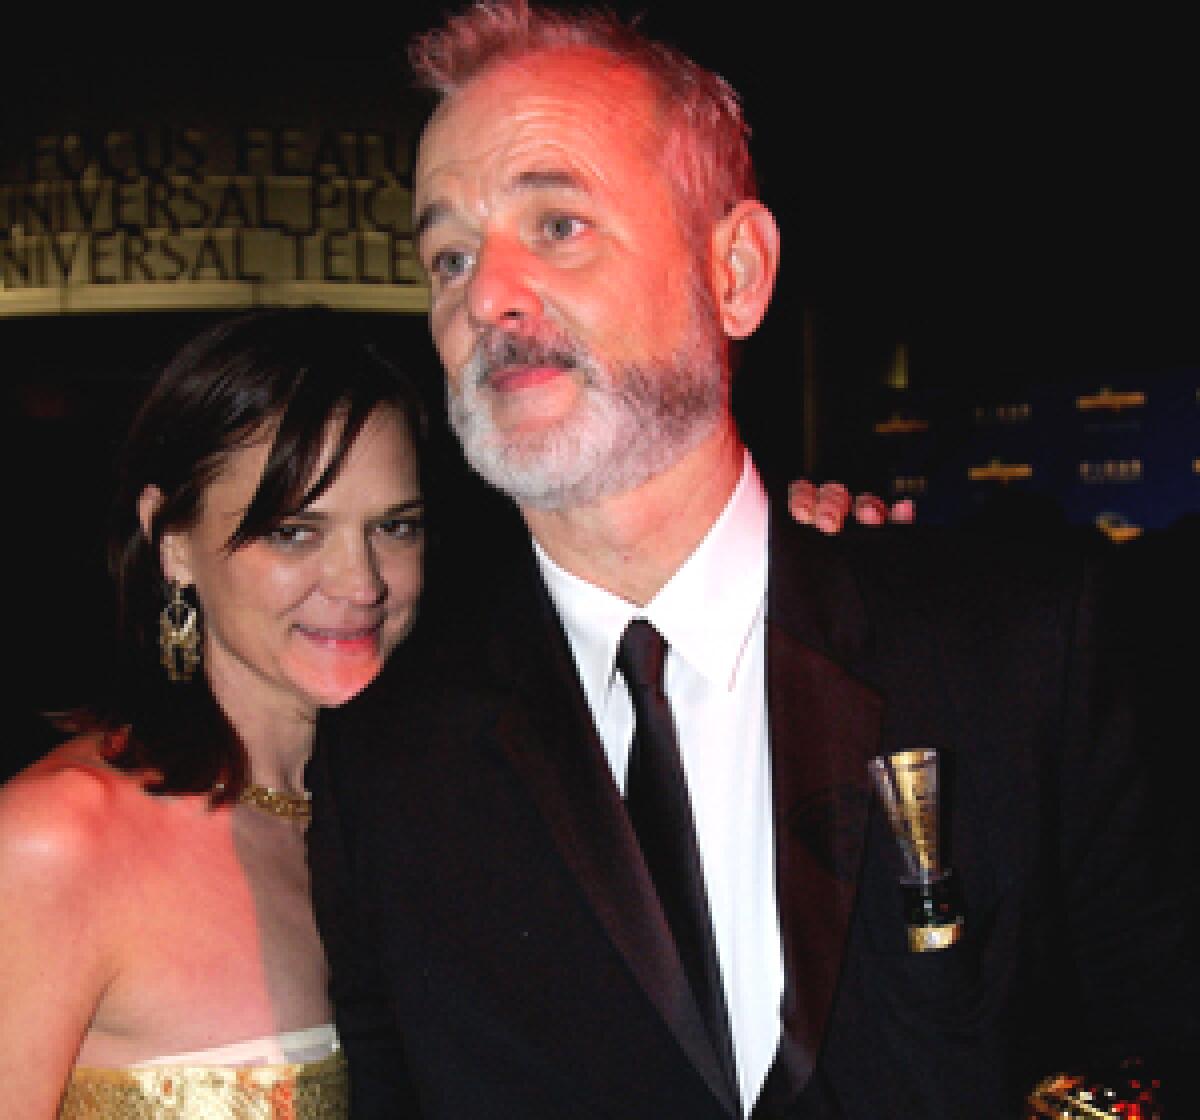 Bill Murray and his wife Jennifer, as seen at the Golden Globe Awards in 2004.